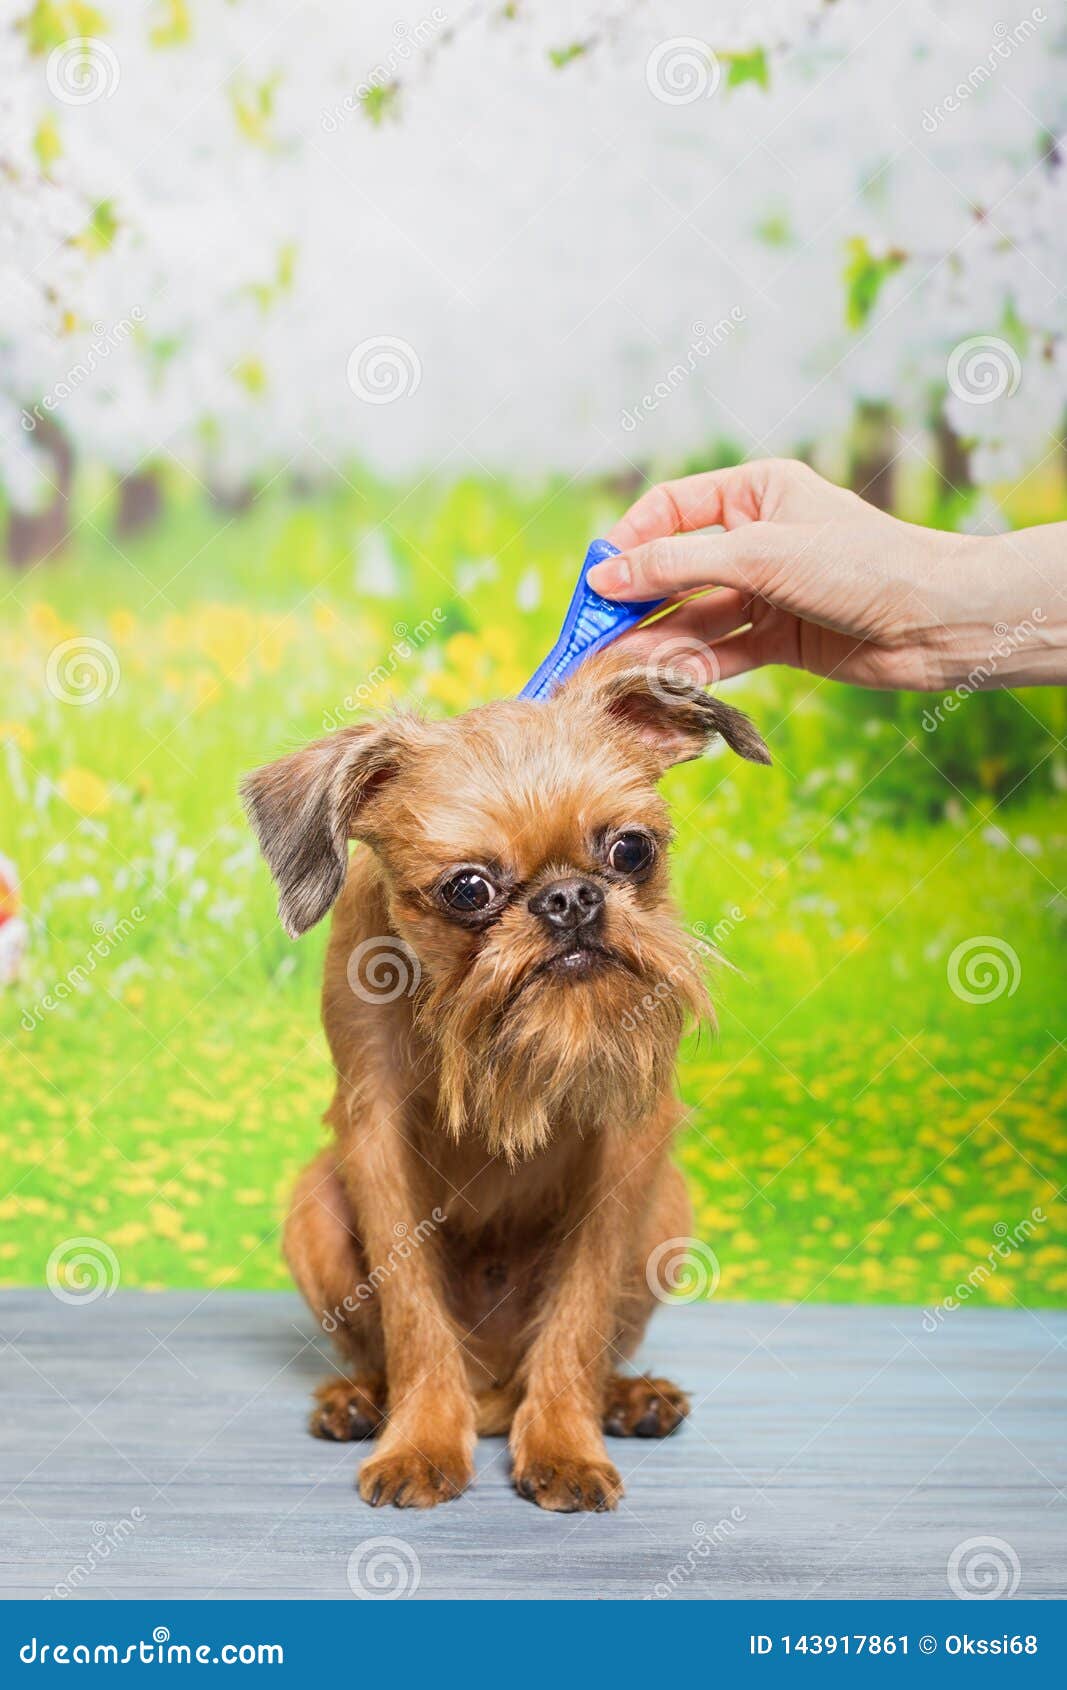 Dog Drip Drops from Fleas and Ticks Stock Image - Image of hair, people ...